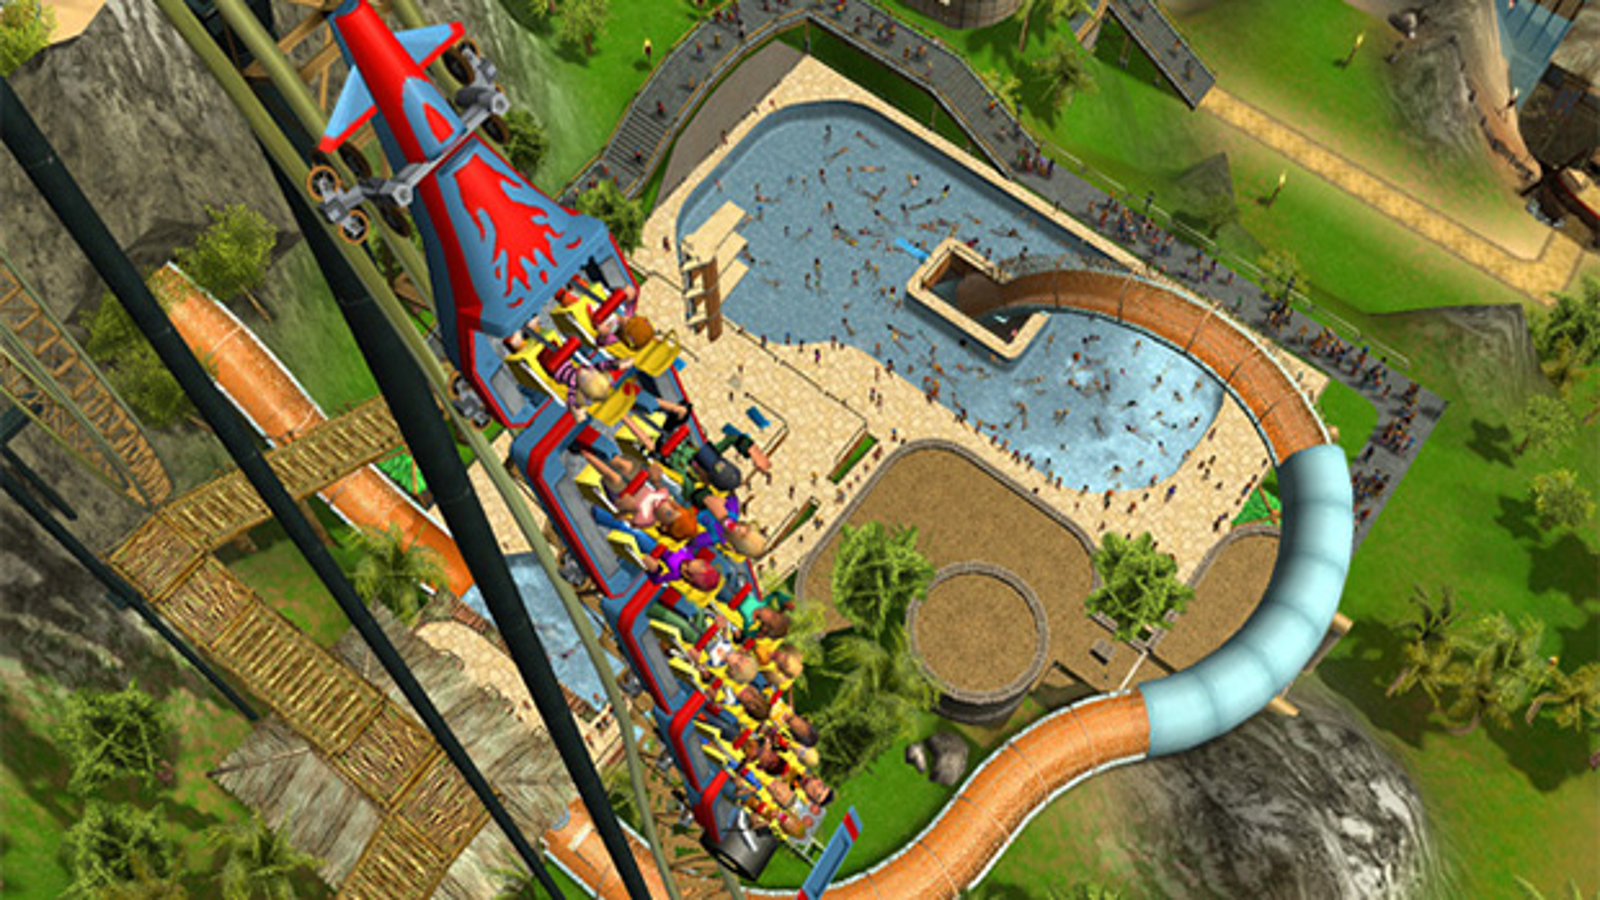 Uie Rollercoaster Tycoon Classic 